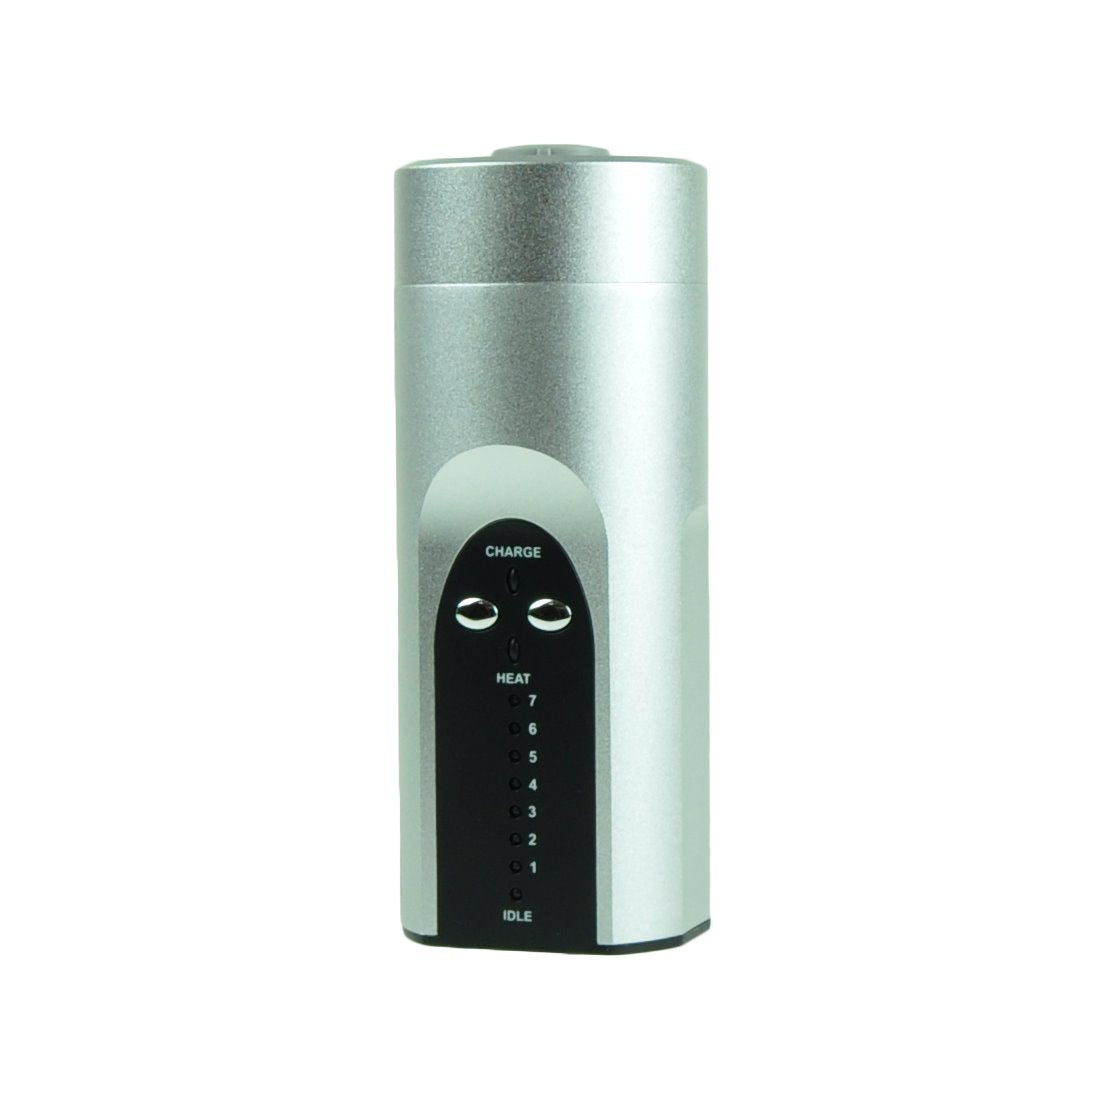 Solo Portable By Arizer Silver Vaporizers Arizer 